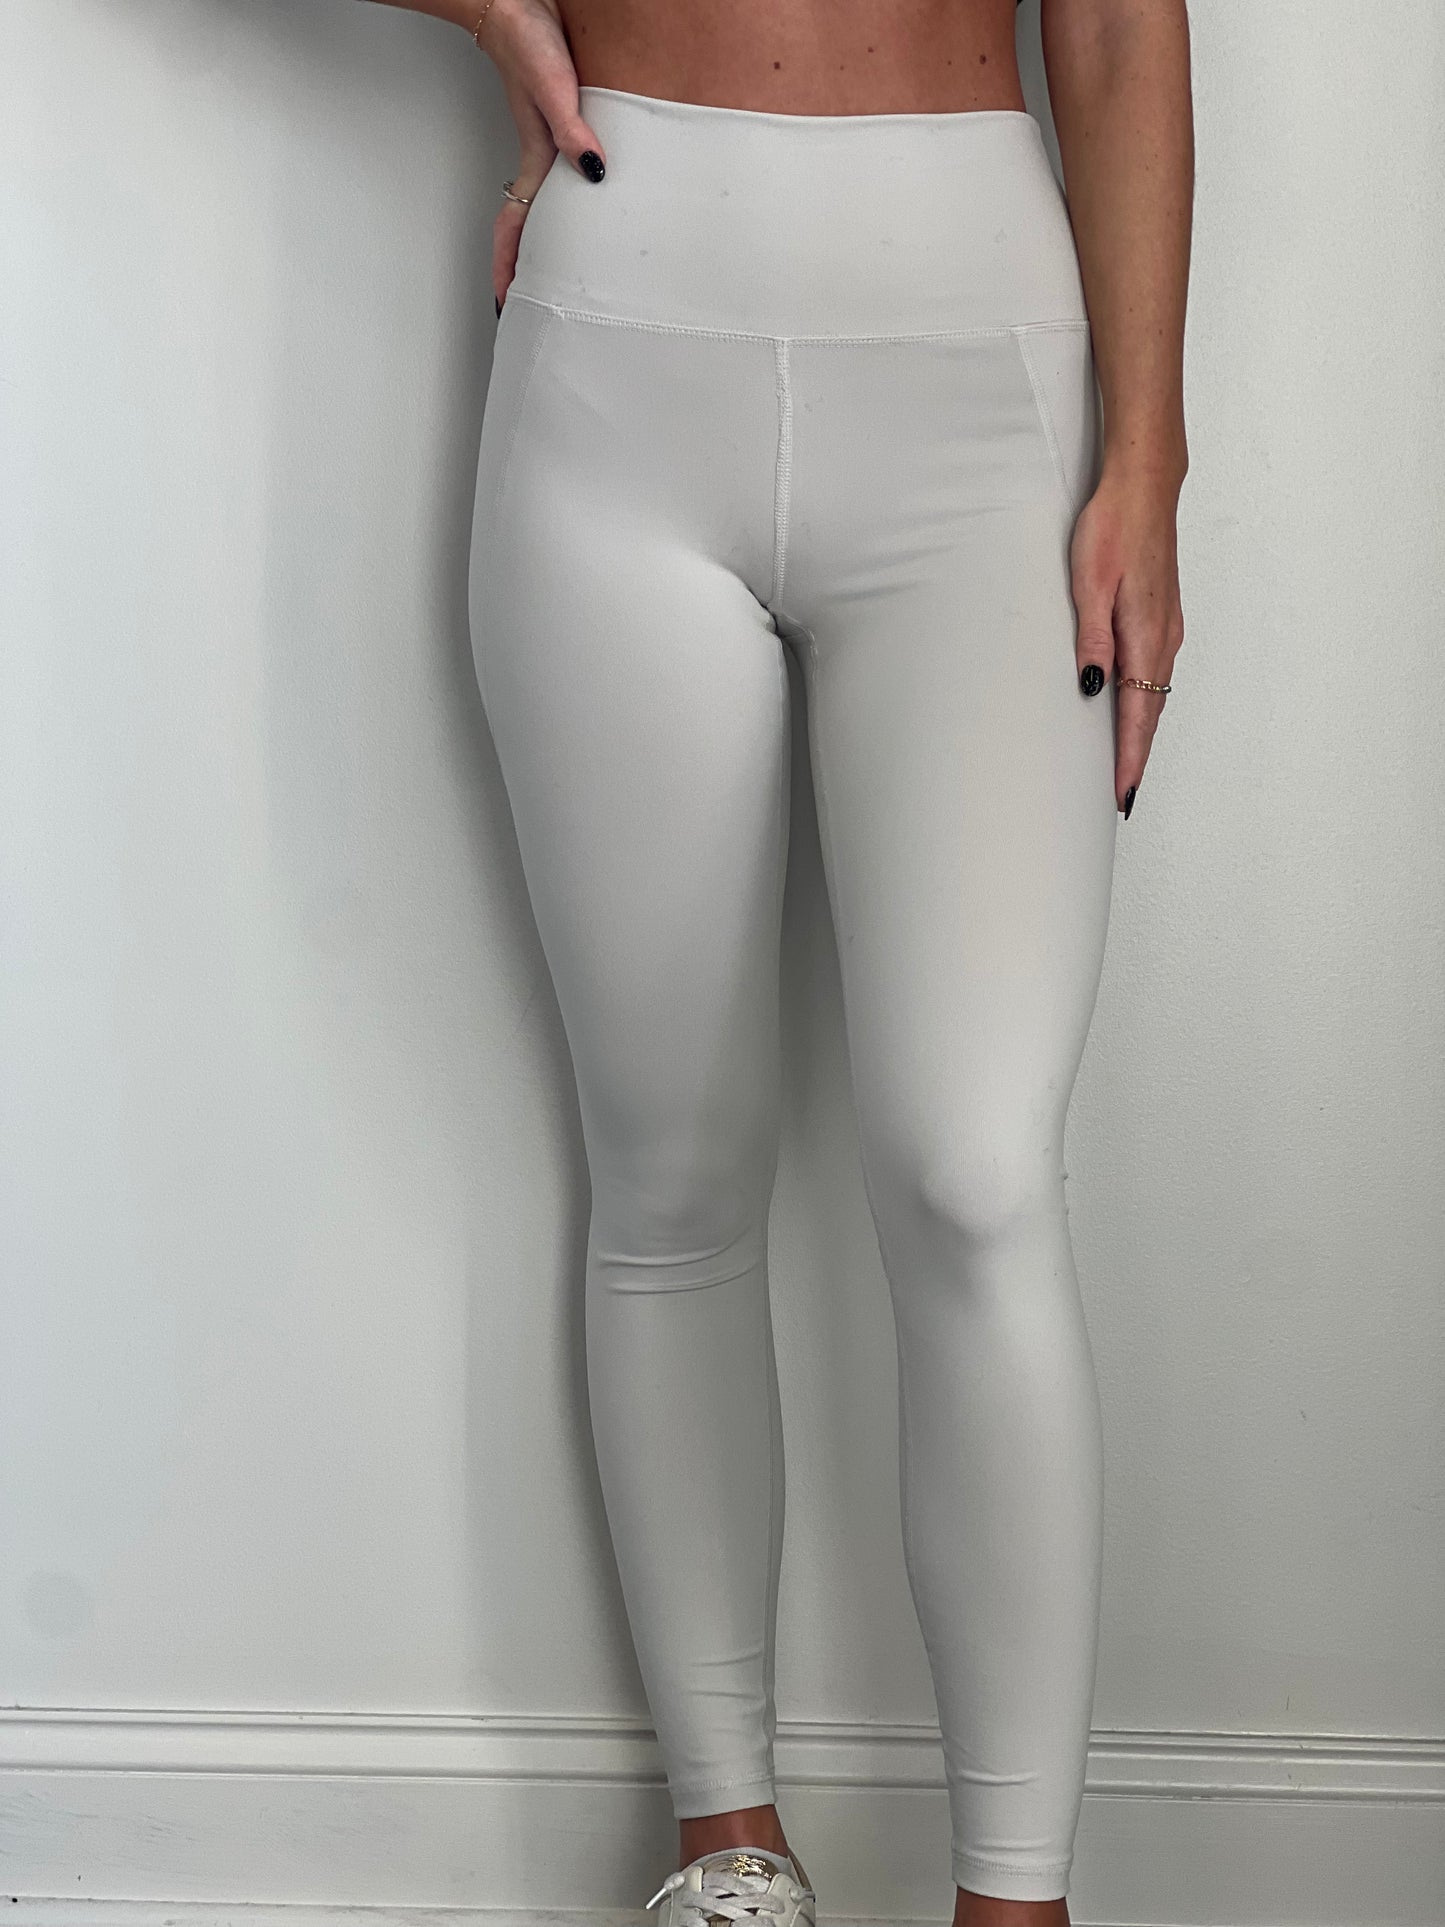 Angie Solid Light Grey Leggings – Allie and Me Boutique